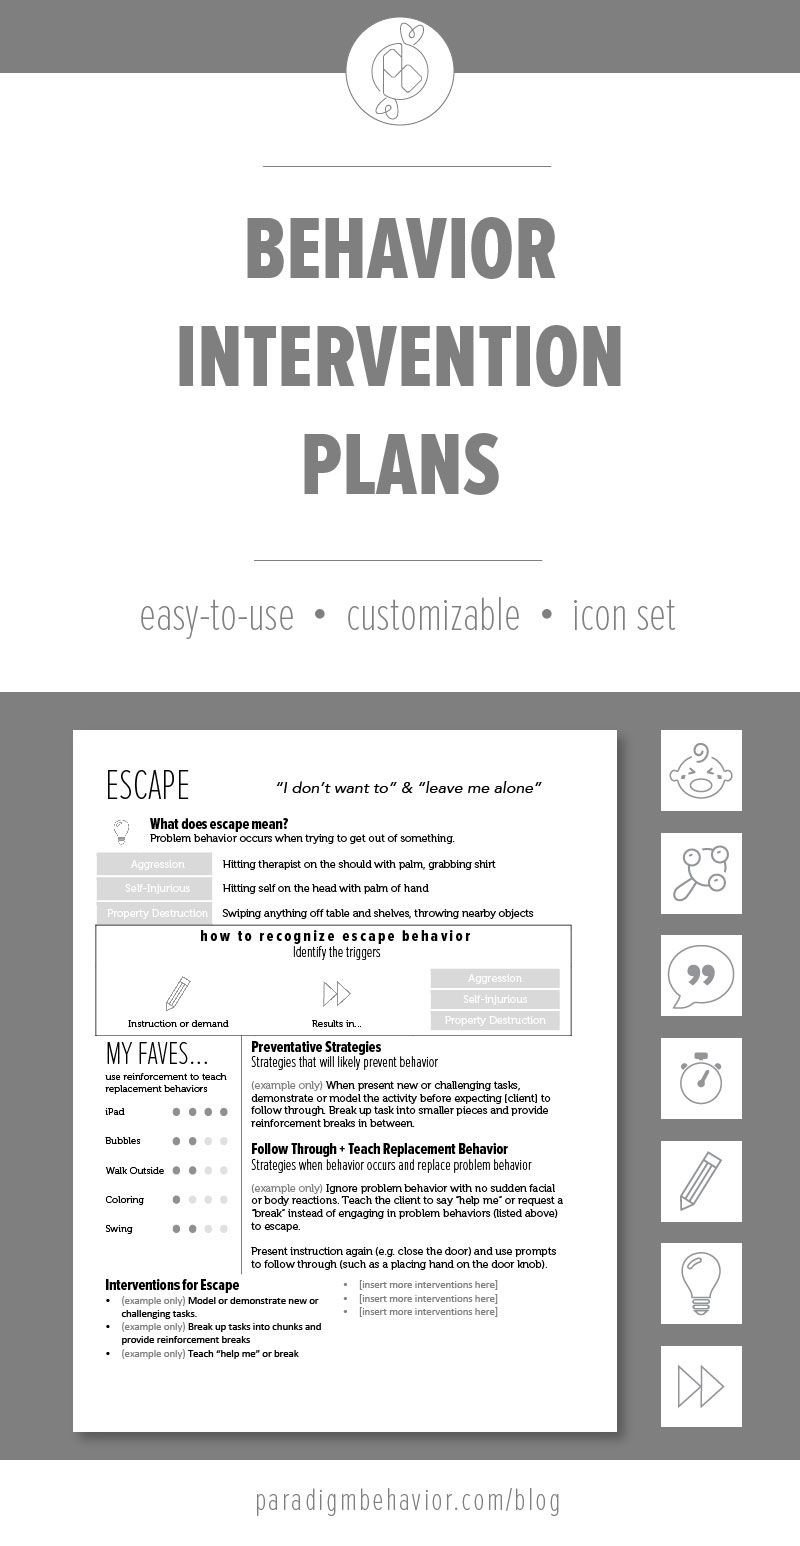 These Behavior Intervention Plan BIP templates are meant